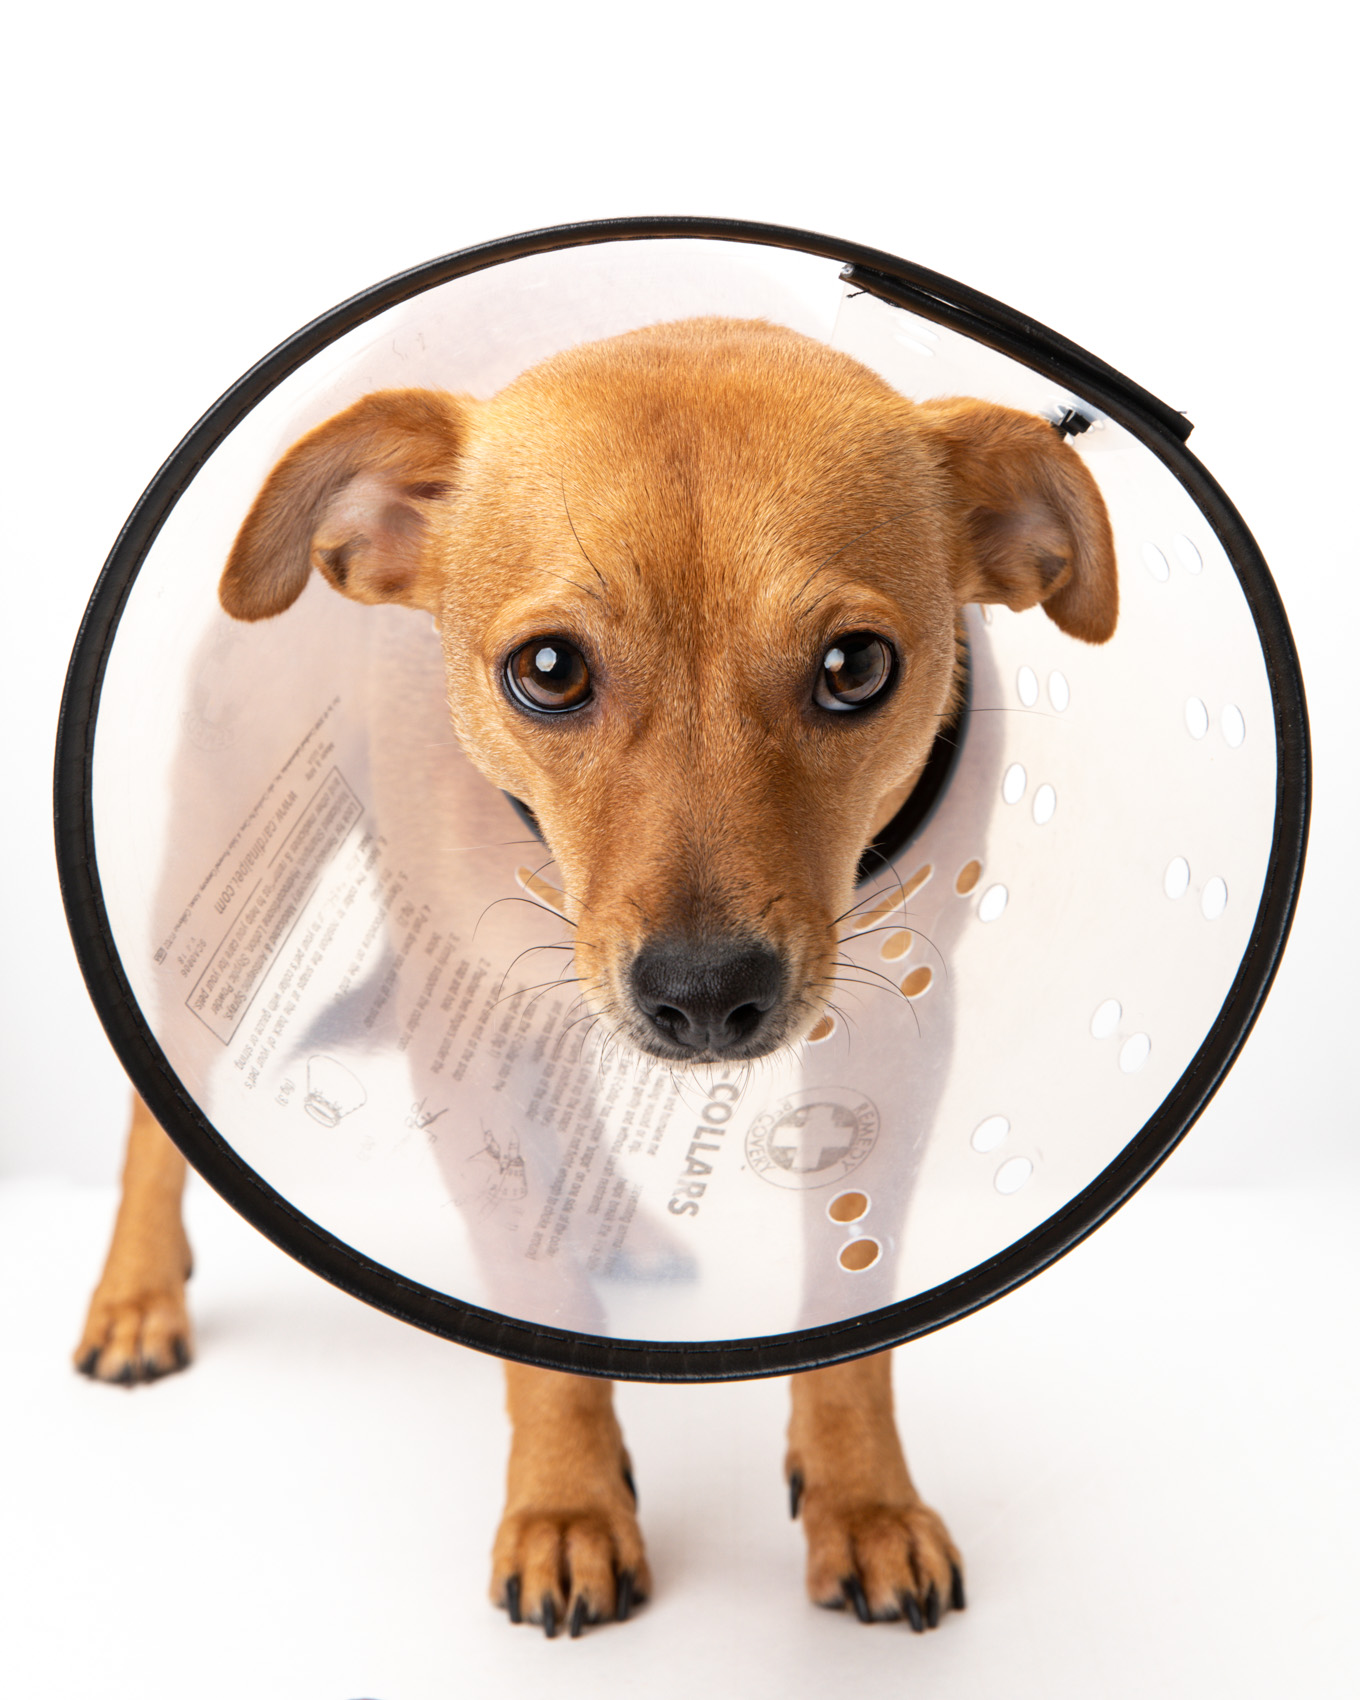 Pet Advertising Photography | Dog in Veterinary Collar by Mark Rogers